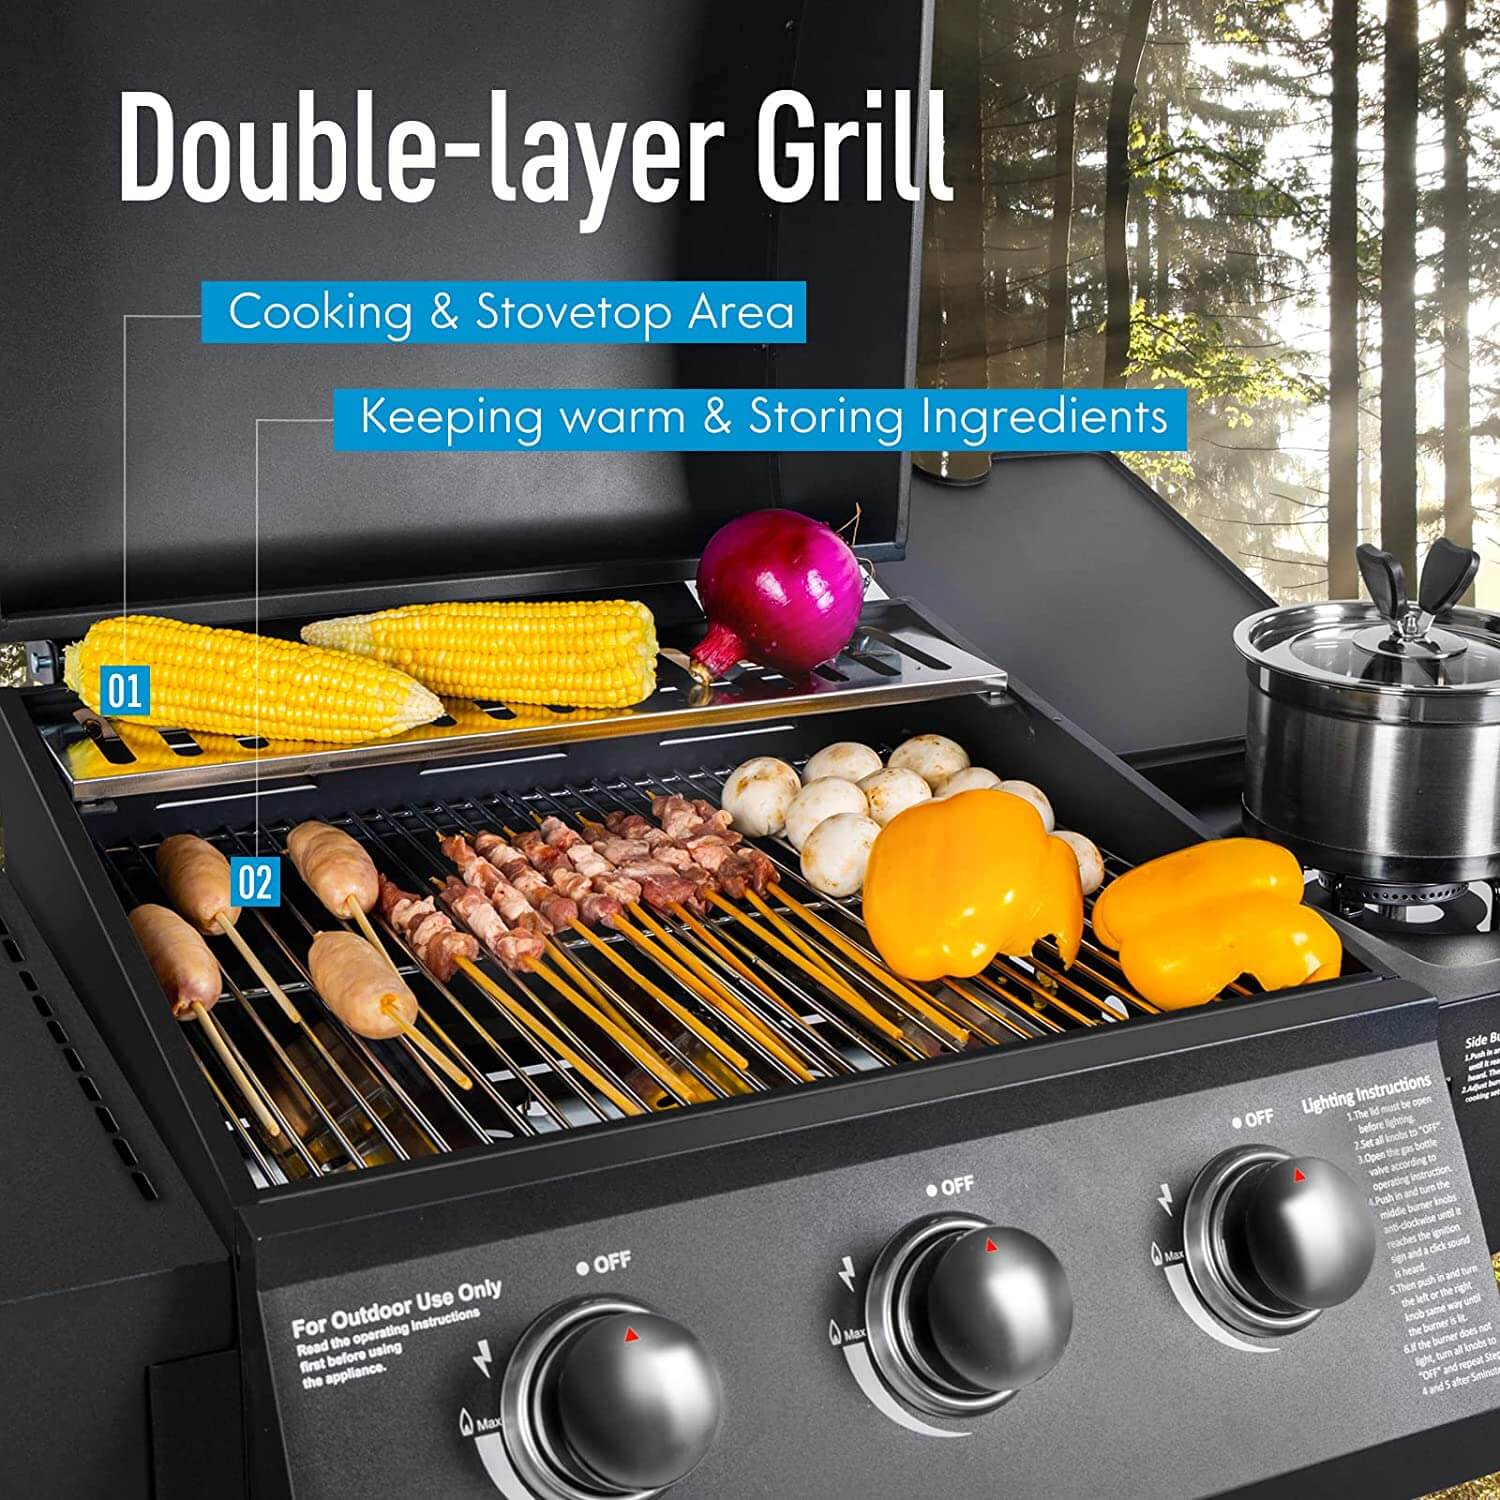 Elecwish Stainless Steel Liquid Propane Gas Grill with Side Burner  is a double-layer grill